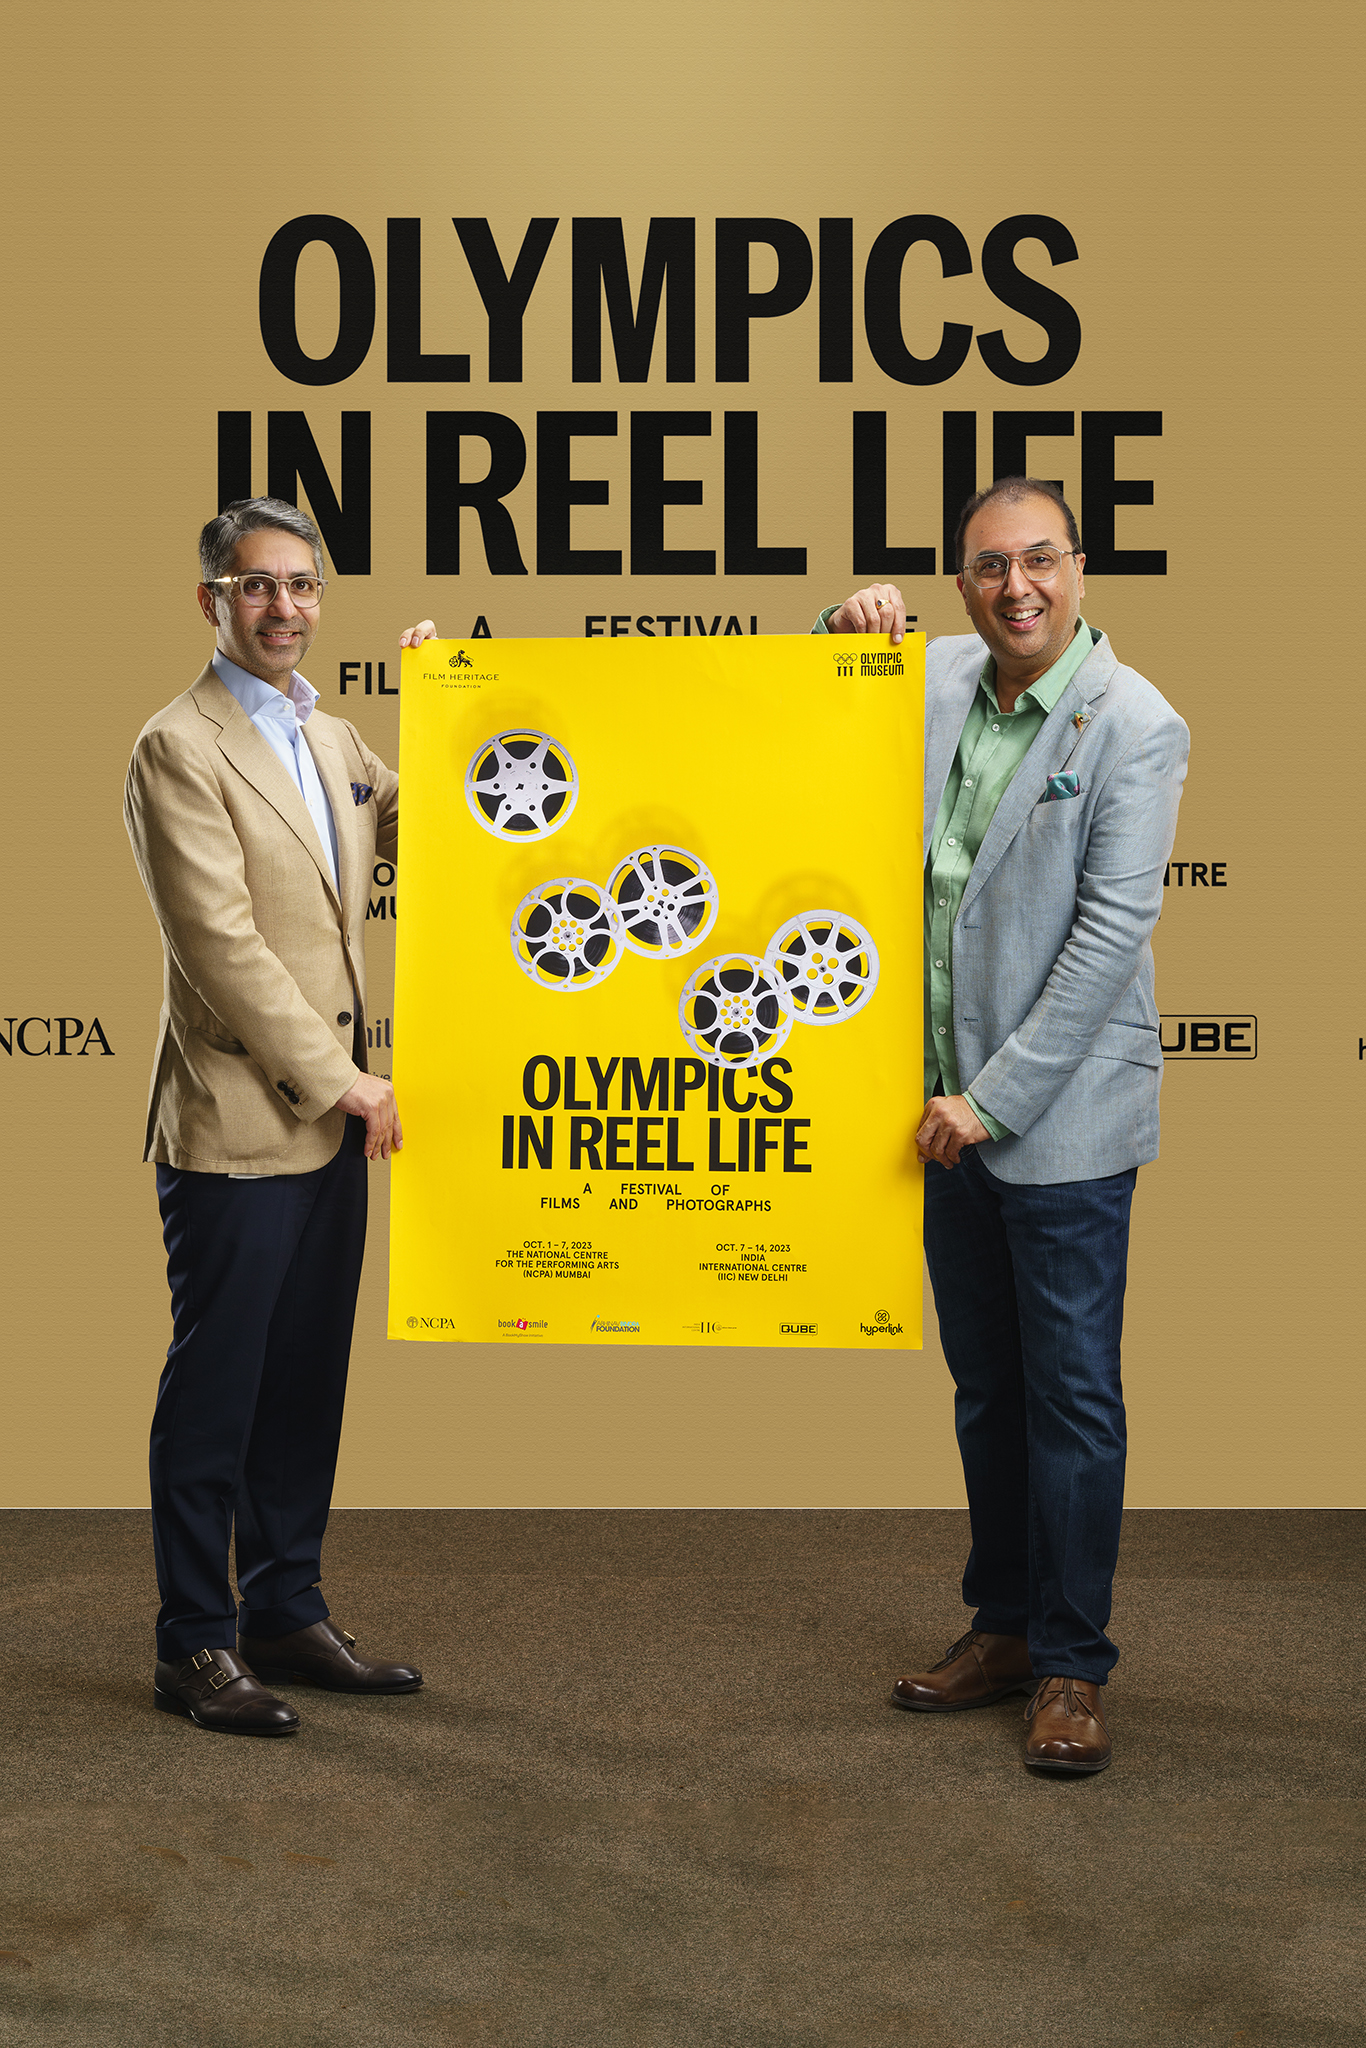 Olympics in Reel Life - A Festival of Films and Photographs